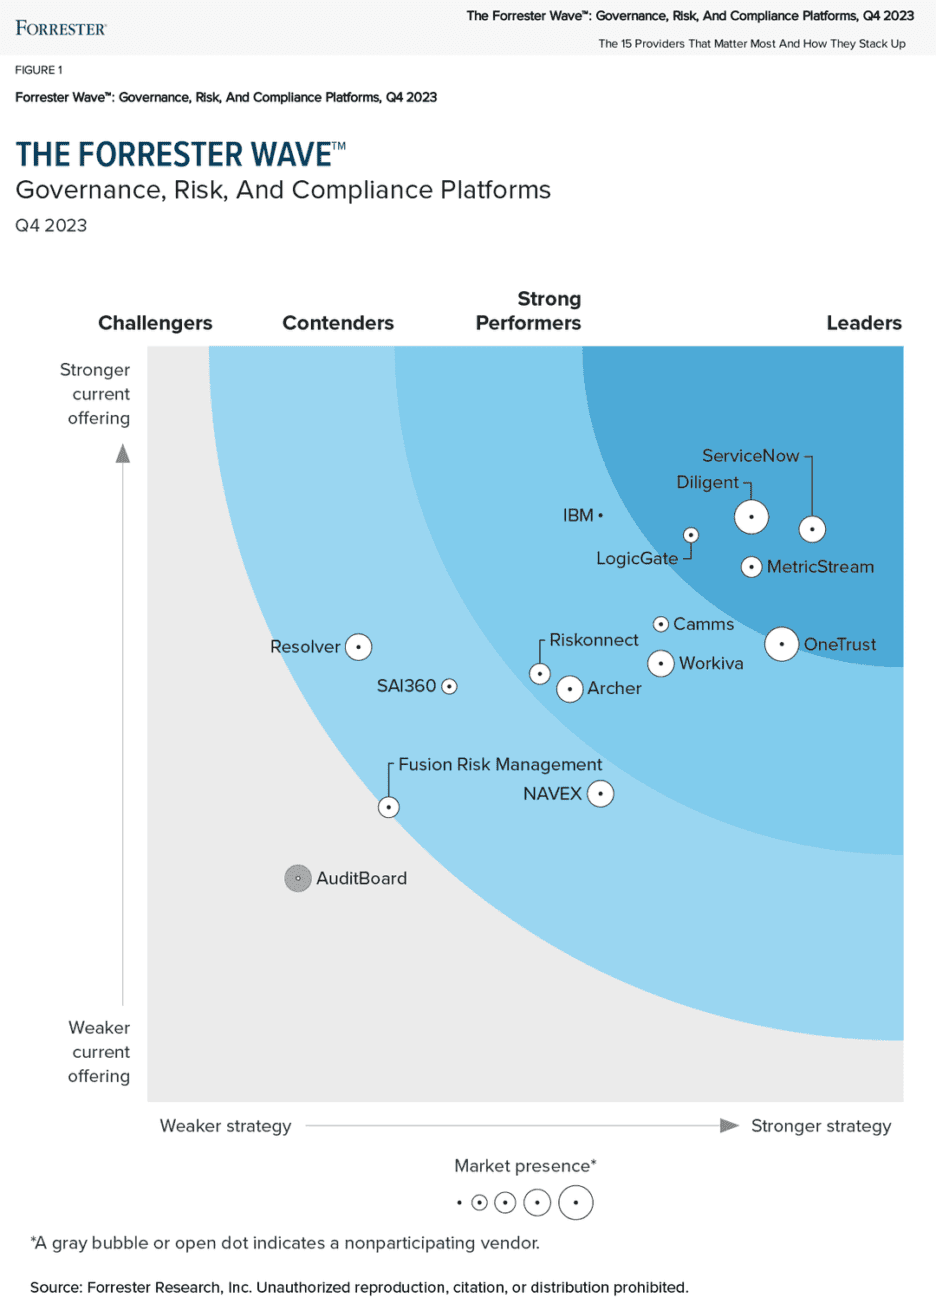 Graphic depicting The Forrester Wave evaluation